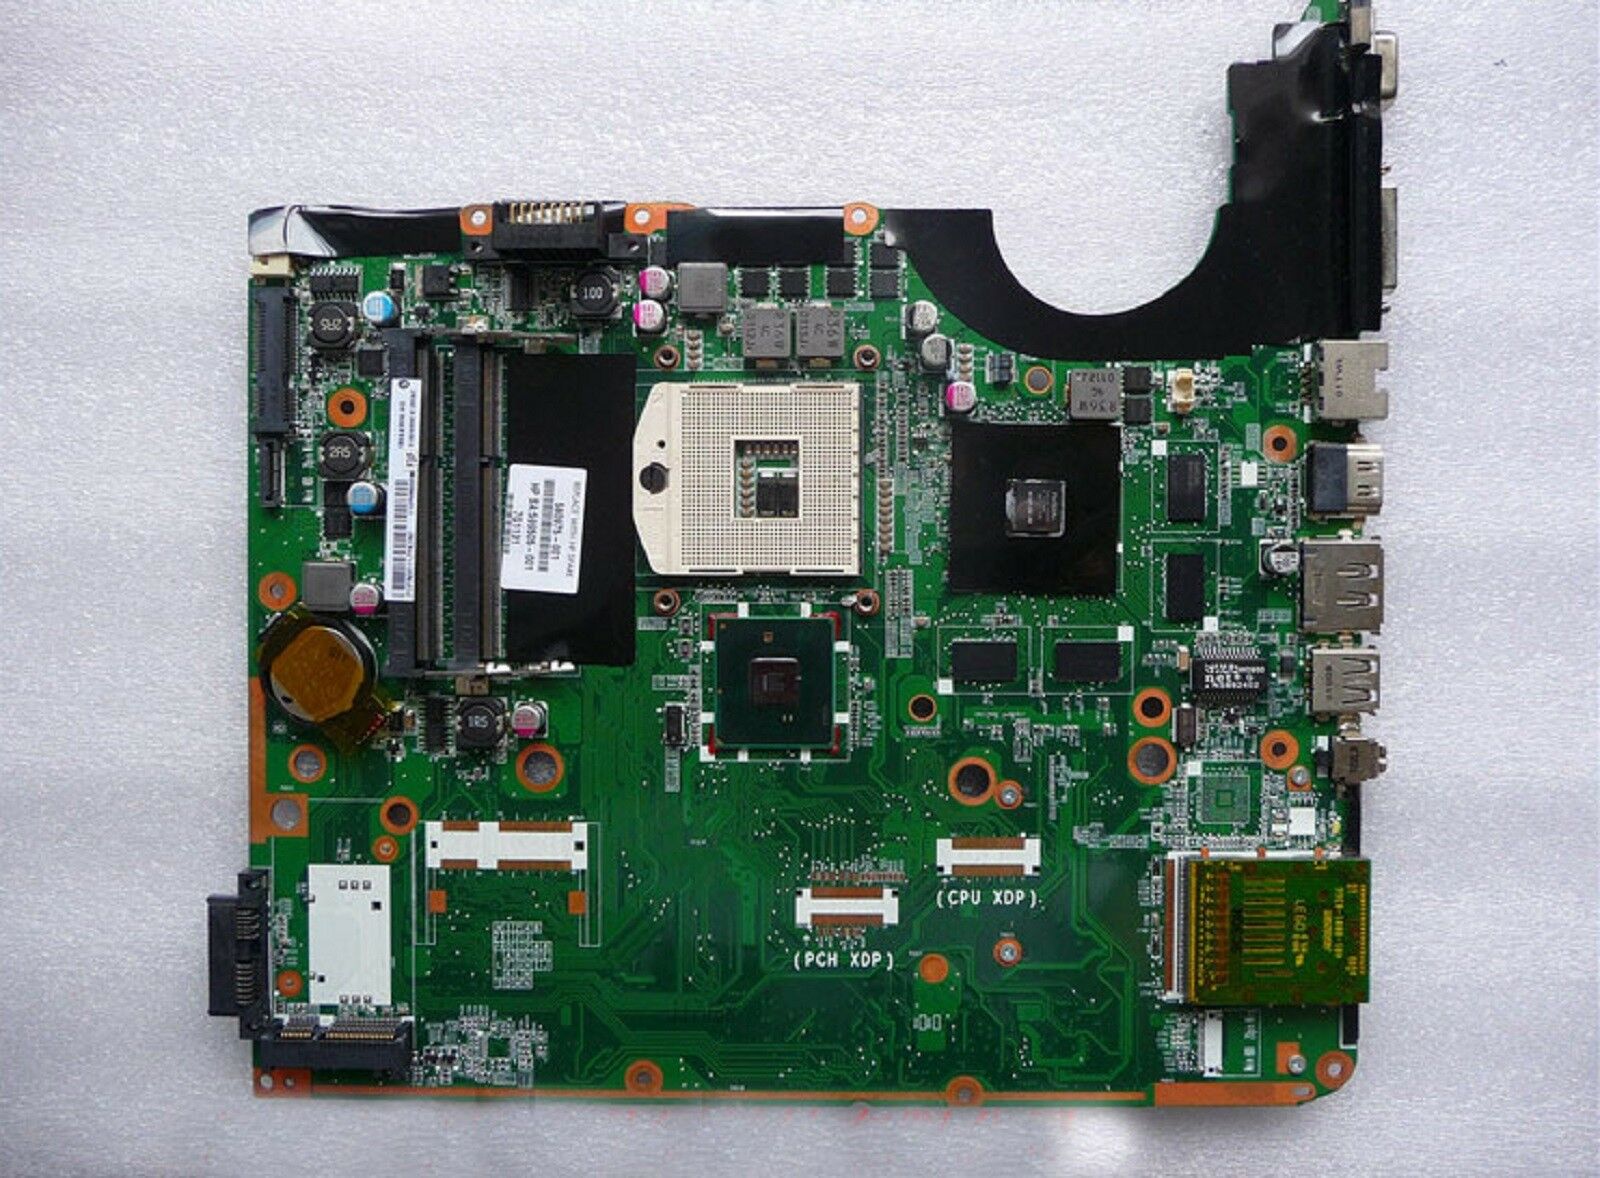 HP DV6 dv6-2000 Intel GT230M/1G Motherboard 580975-001 Tested Good Compatible CPU Brand: Intel Number of